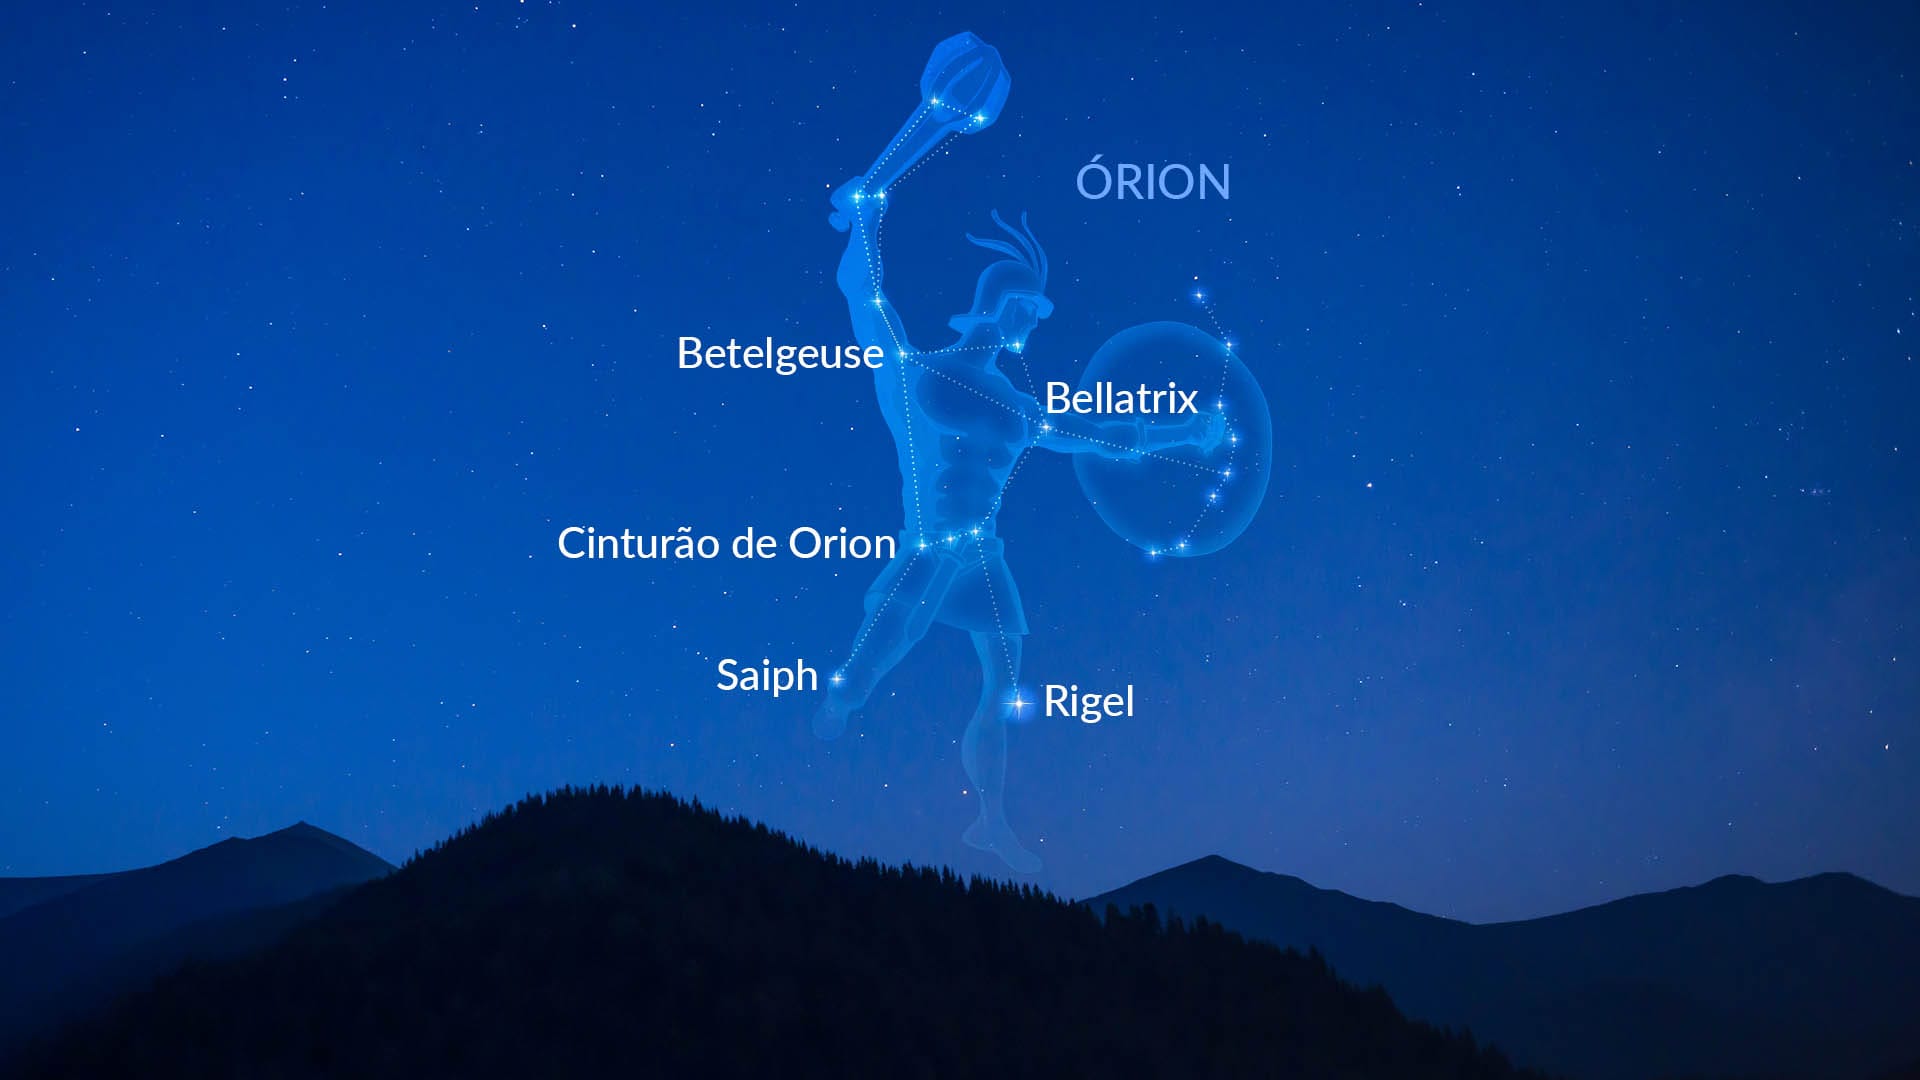 The constellation Orion with the brightest stars